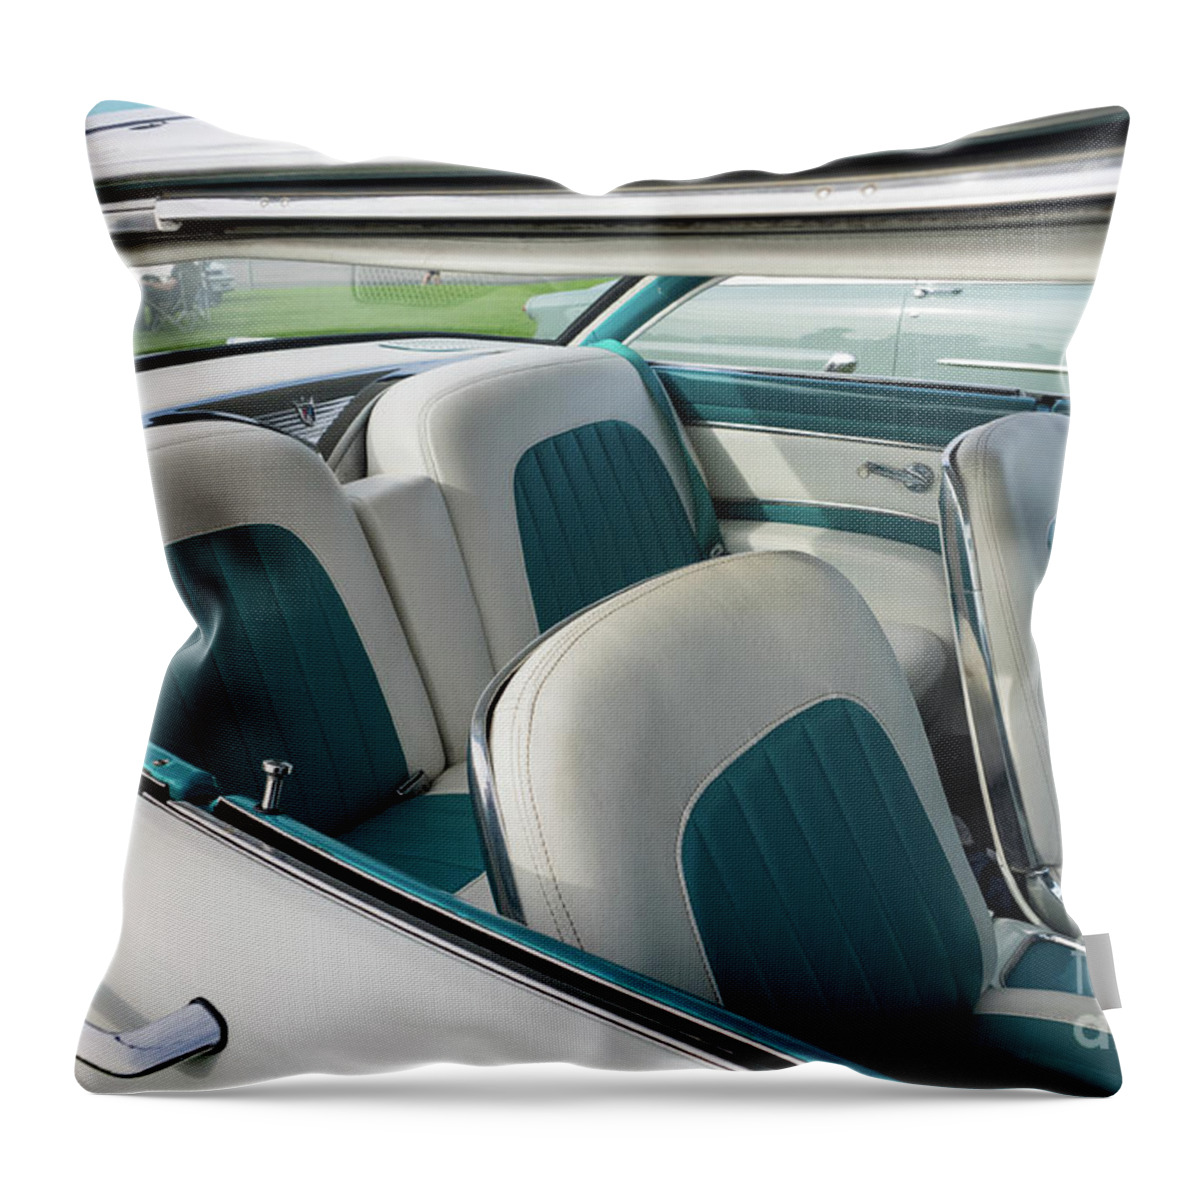 1950s Throw Pillow featuring the photograph Ford Fairlane Victoria 05 by Rick Piper Photography